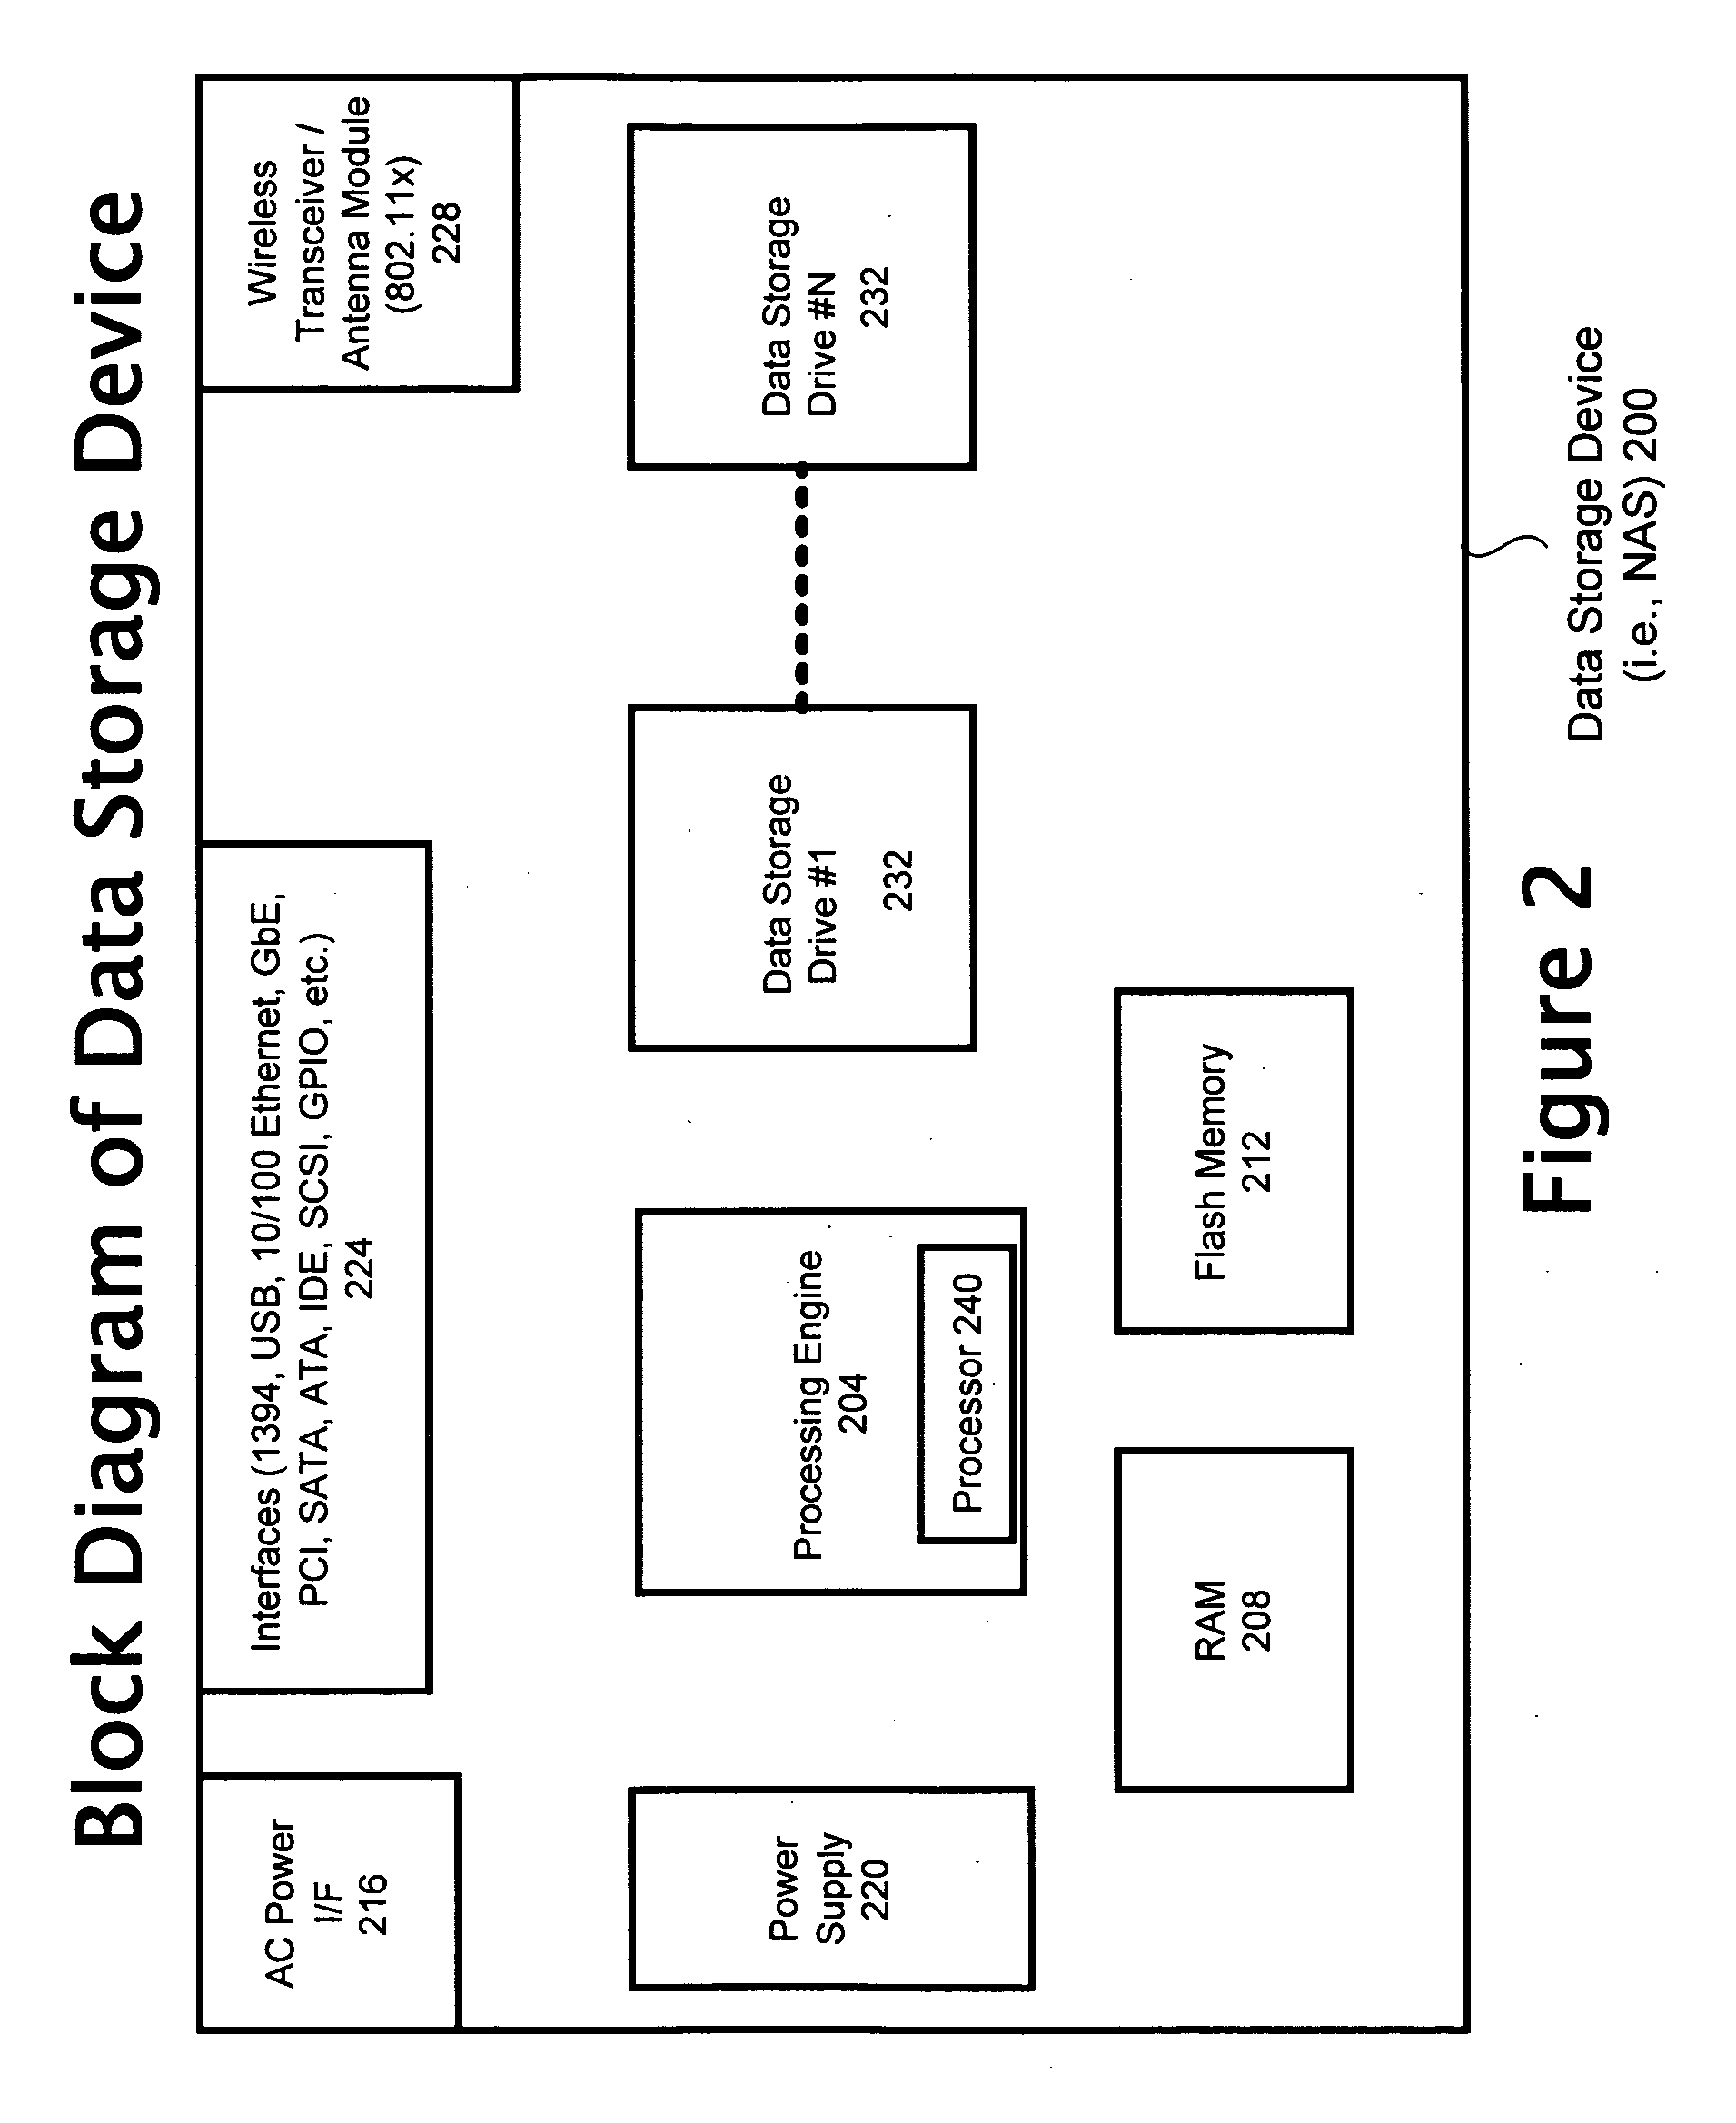 Method and system for flexibly providing shared access to non-data pool file systems